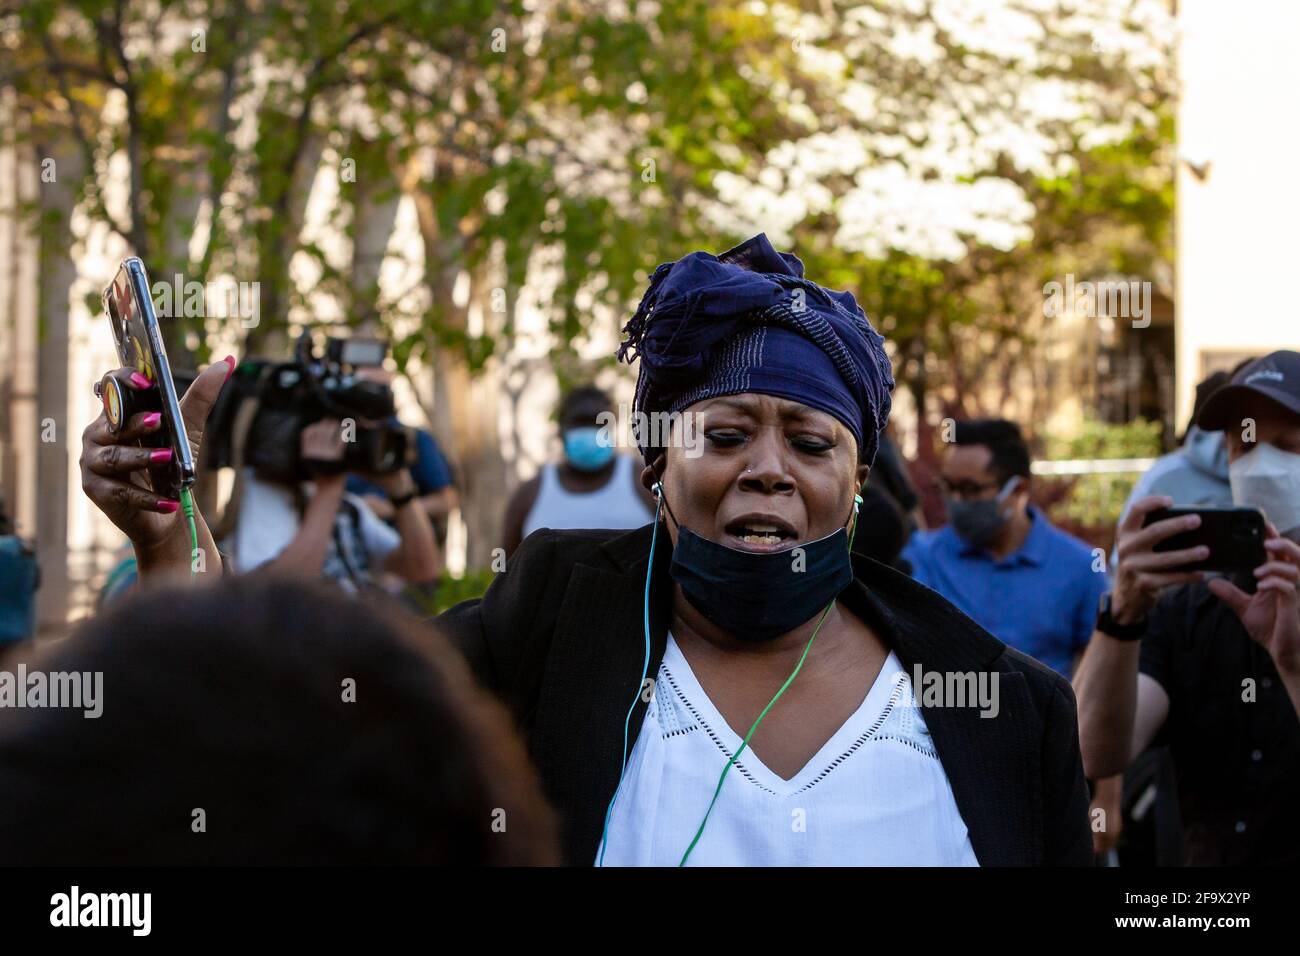 Washington, DC, USA, 20 April, 2021.  Pictured: Lisa Robinson of Washington, DC, celebrates the conviction of former police officer Derek Chauvin for the murder of George Floyd immediately after the verdict is announced.  Credit: Allison C Bailey/Alamy Live News Stock Photo